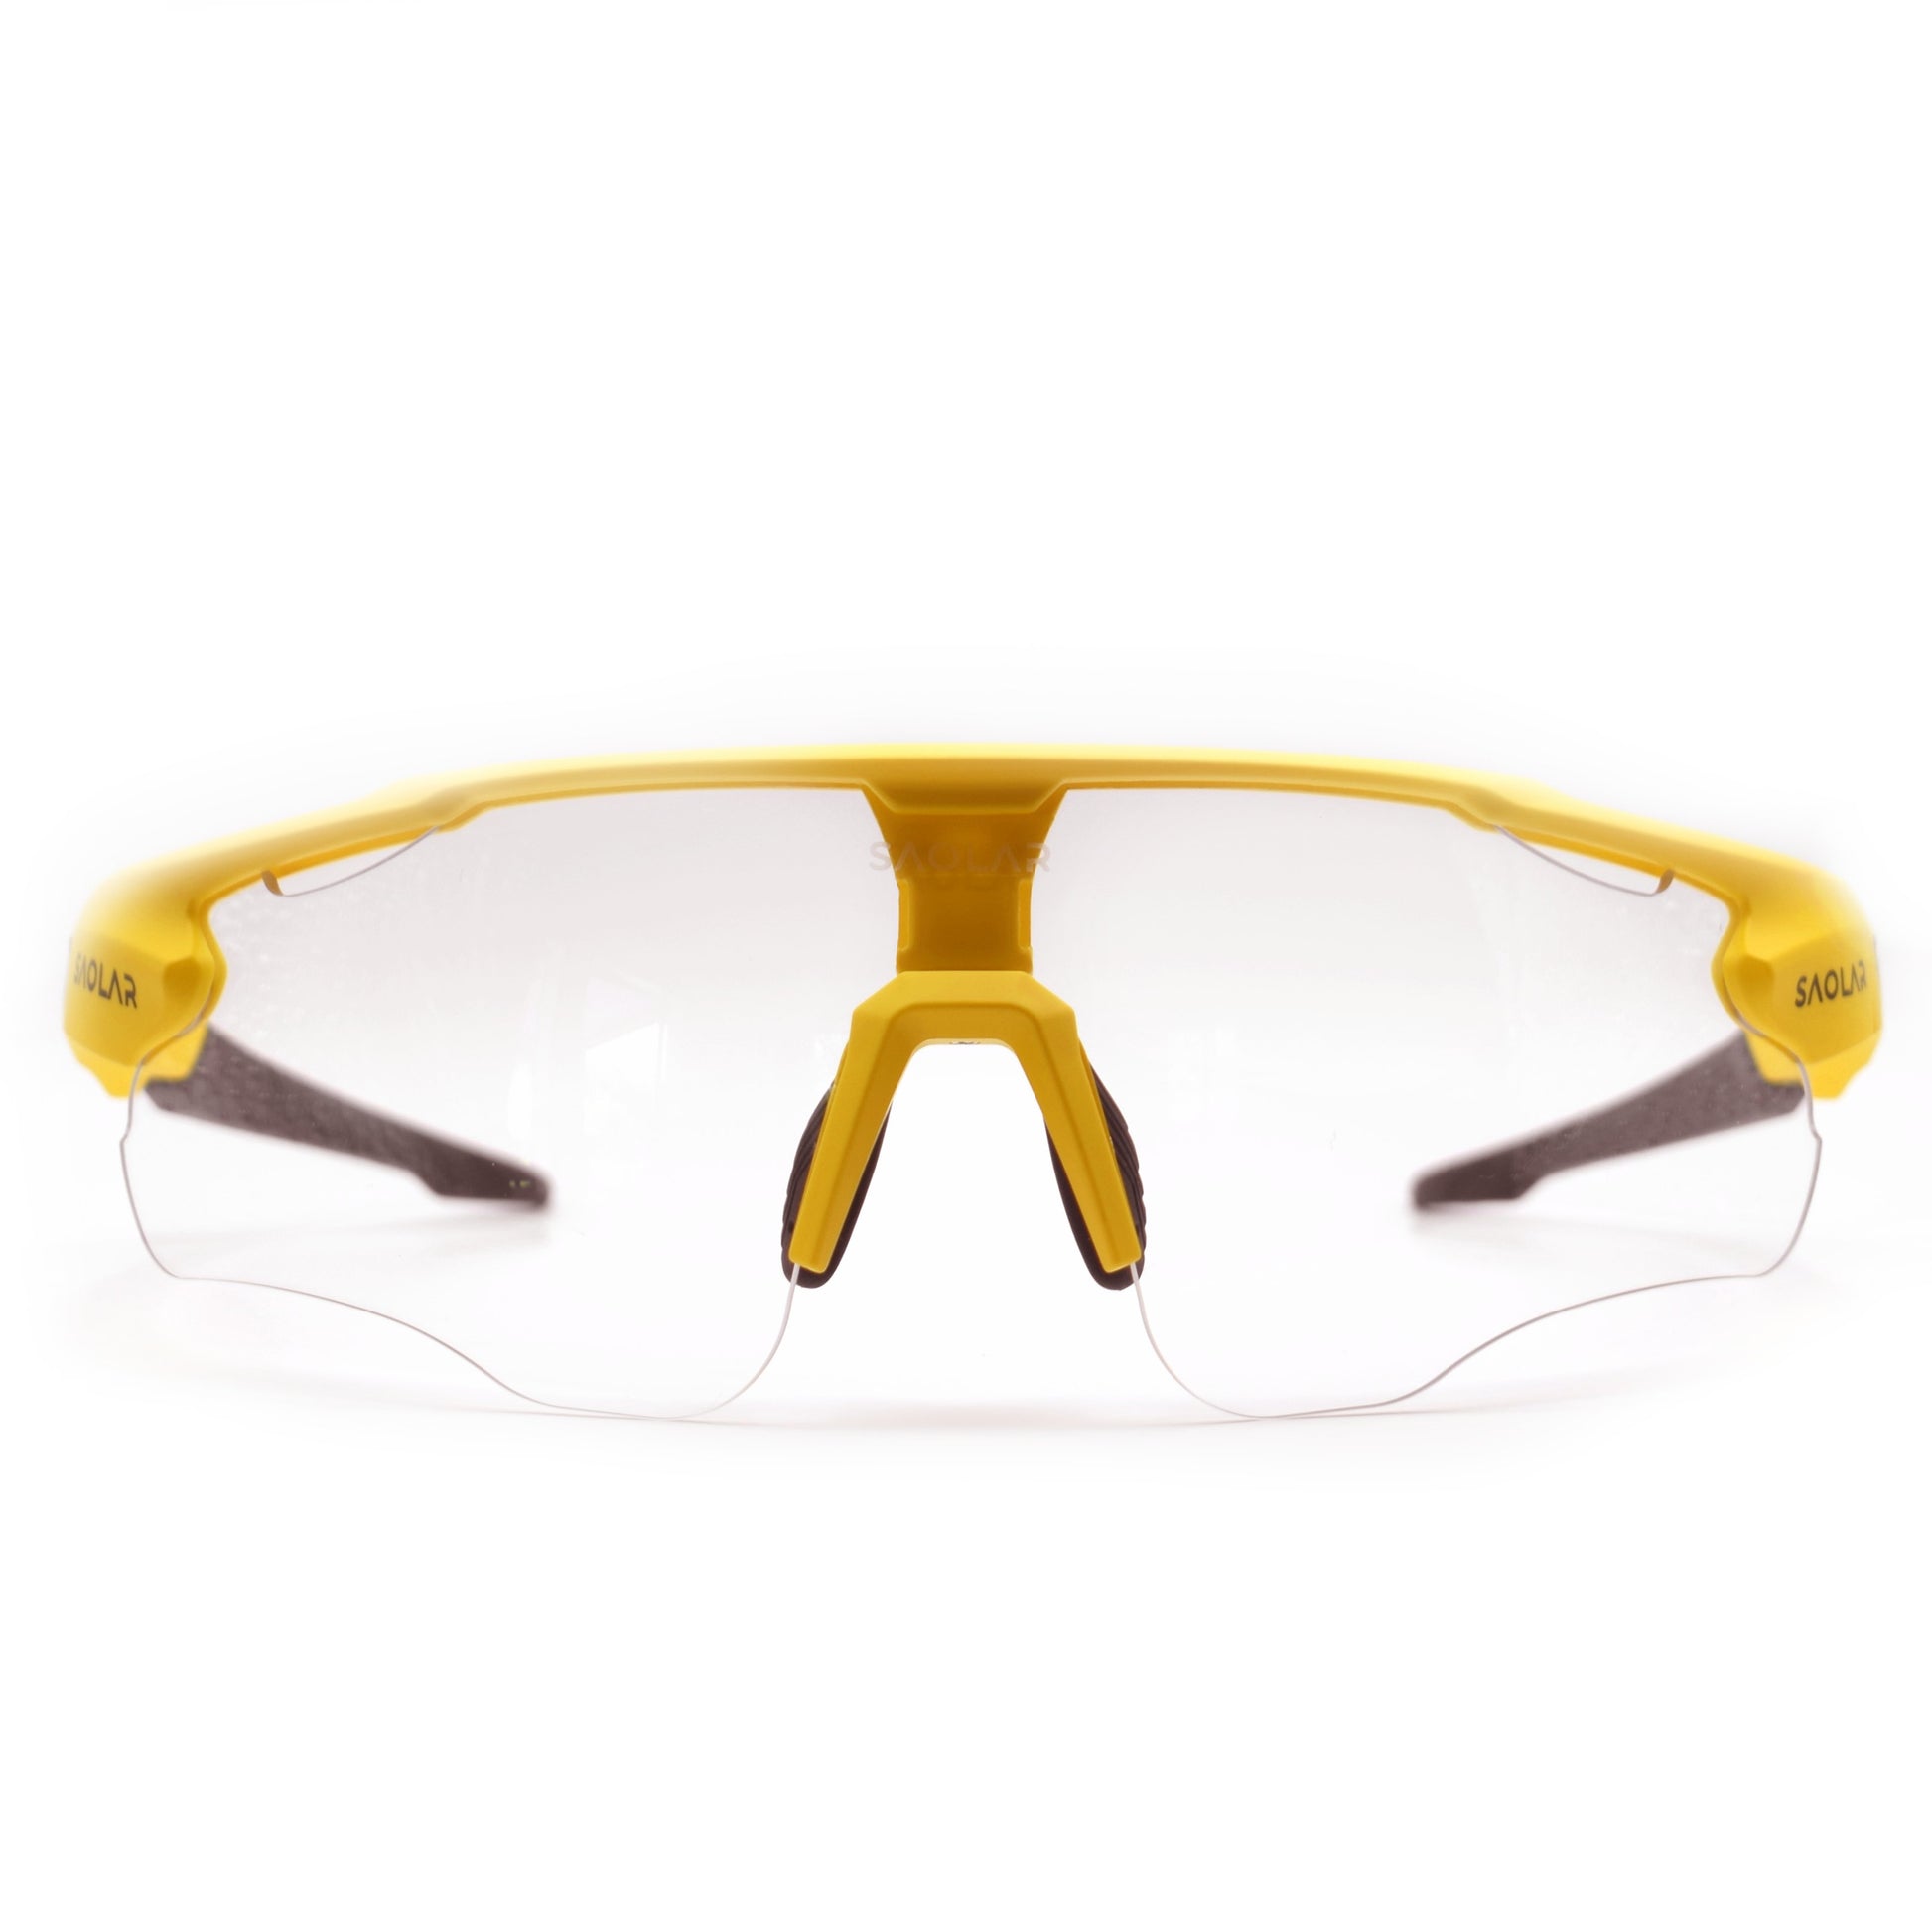 Helios Photochromic Cycling Glasses - Front transparent